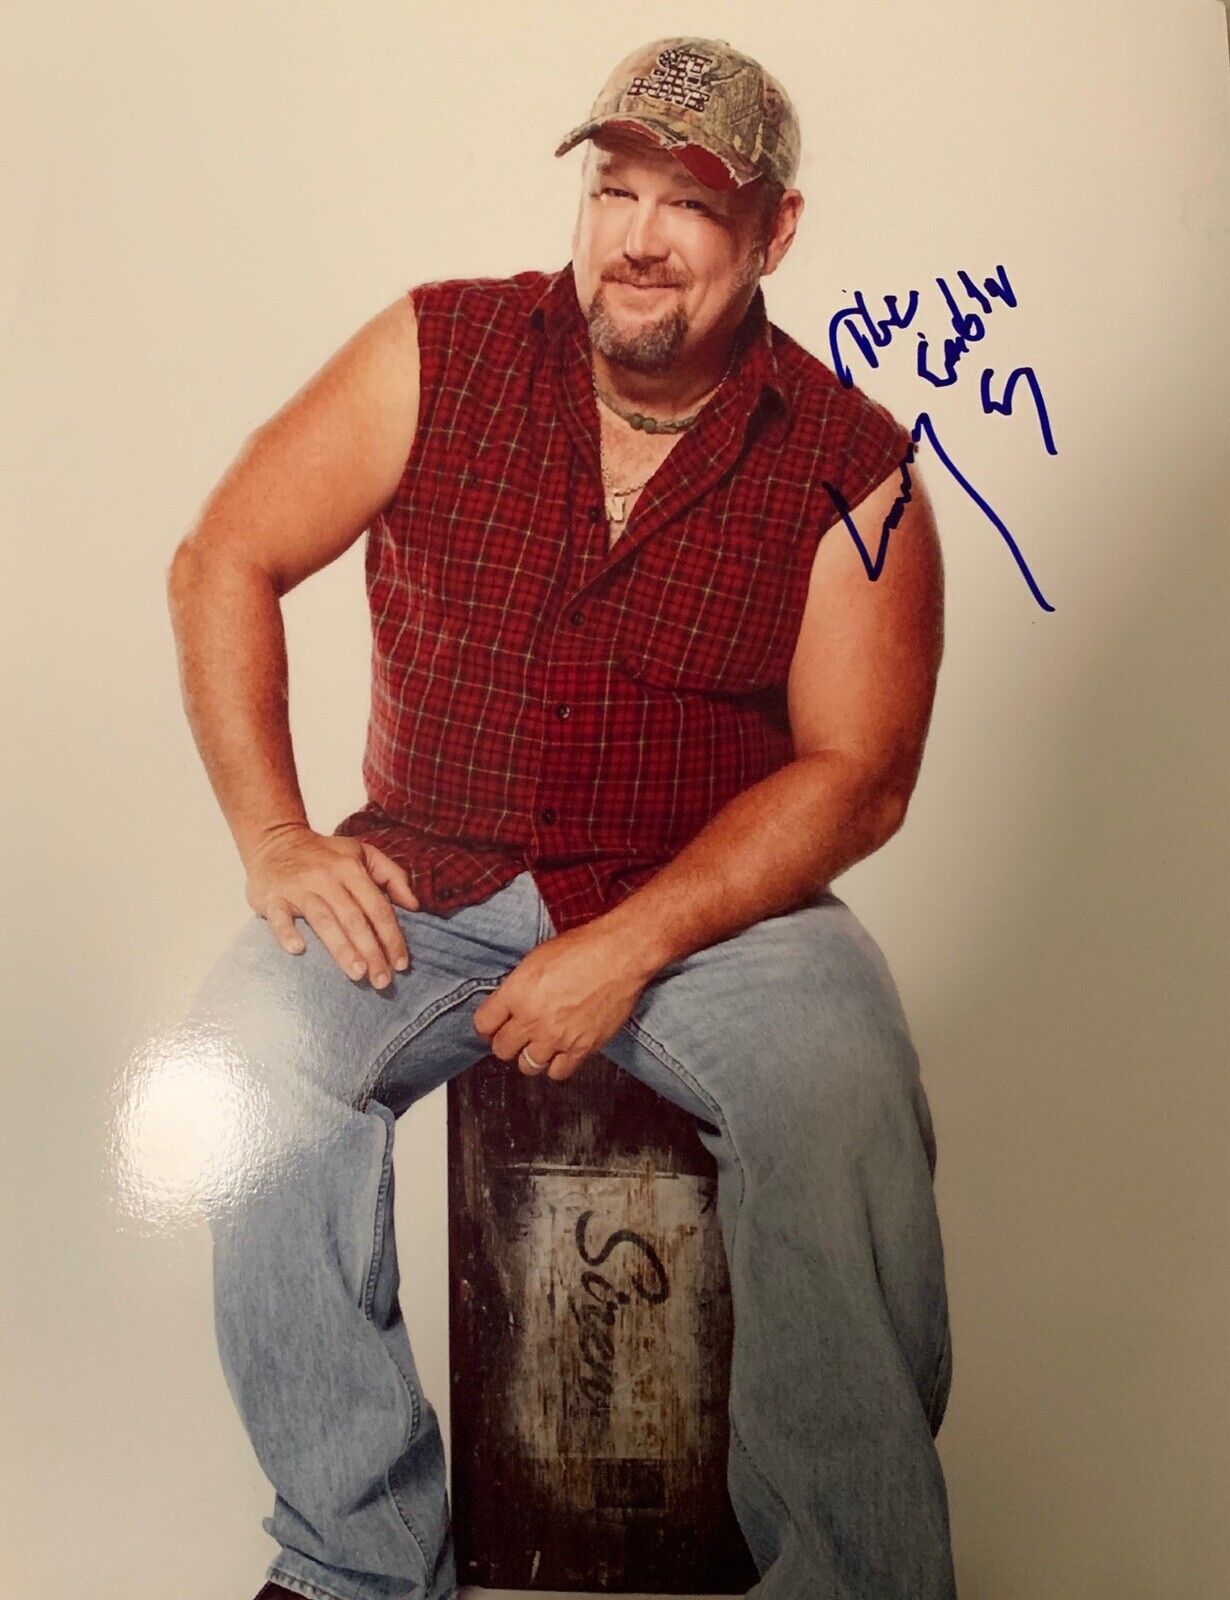 larry the cable guy signed 8x10 Photo Poster painting Pic Auto